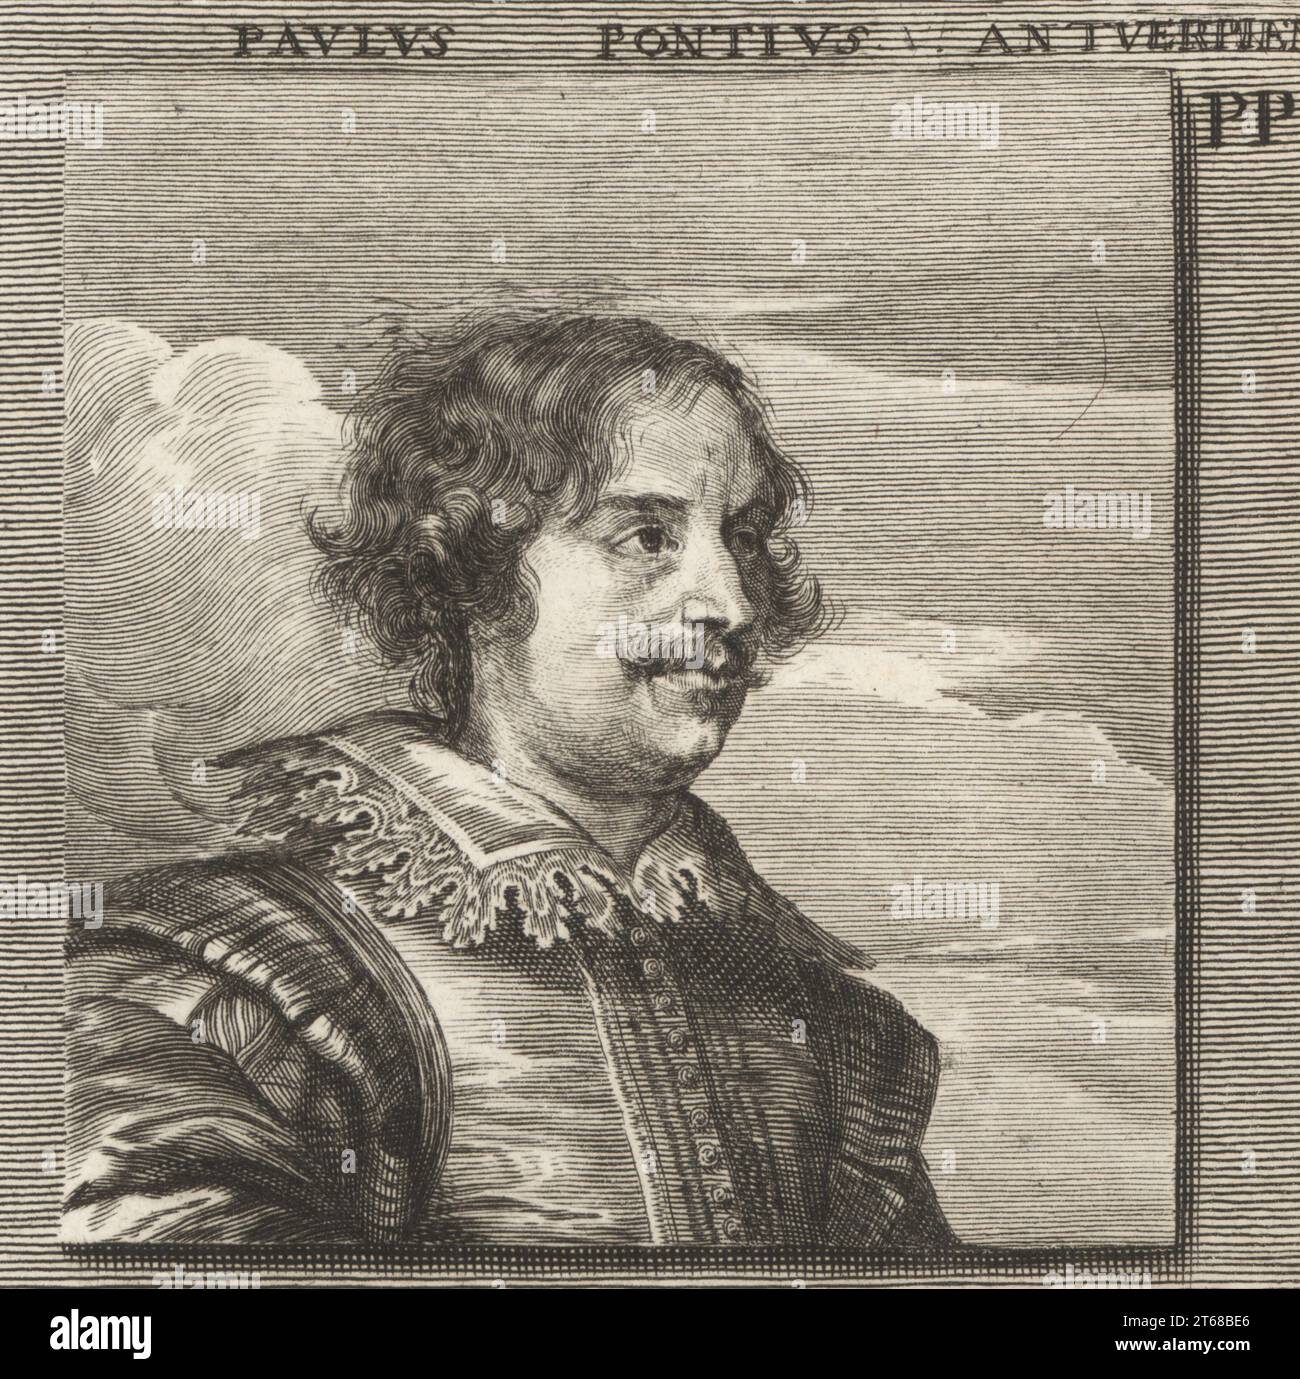 Paulus Pontius, Flemish engraver and painter from Antwerp, 1603-1658. A leading engraver connected with Peter Paul Rubens, Anthony van Dyck and Jacob Jordaens. Paulus Pontius Antverpien. Copperplate engraving after an illustration by Joachim von Sandrart from his LAcademia Todesca, della Architectura, Scultura & Pittura, oder Teutsche Academie, der Edlen Bau- Bild- und Mahlerey-Kunste, German Academy of Architecture, Sculpture and Painting, Jacob von Sandrart, Nuremberg, 1675. Stock Photo